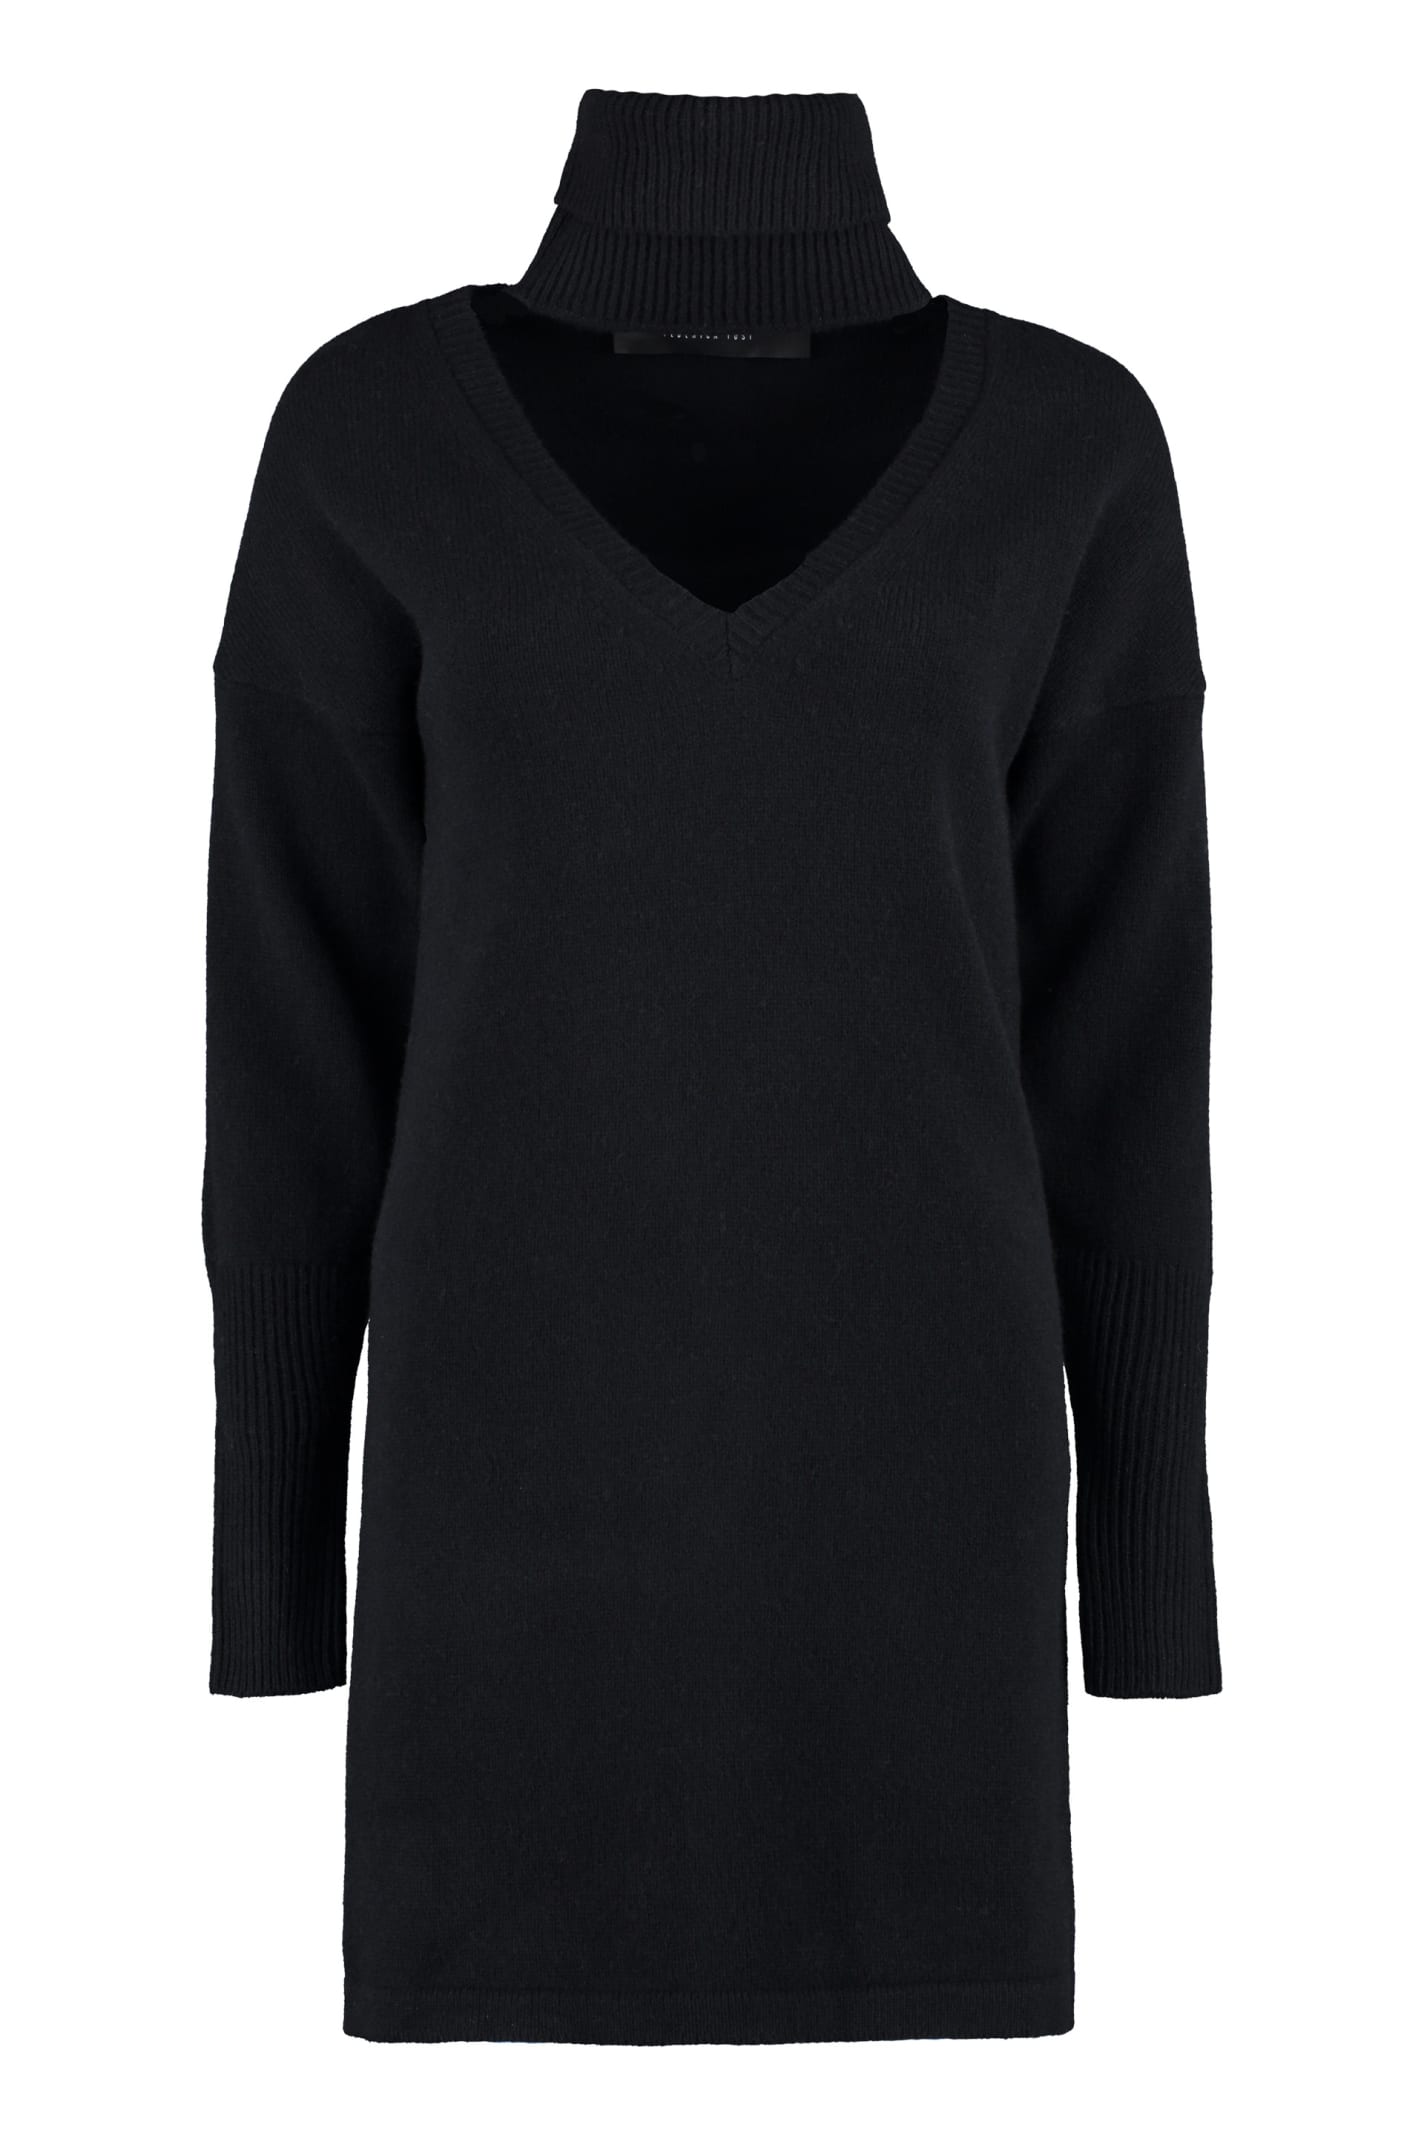 FEDERICA TOSI WOOL AND CASHMERE SWEATER